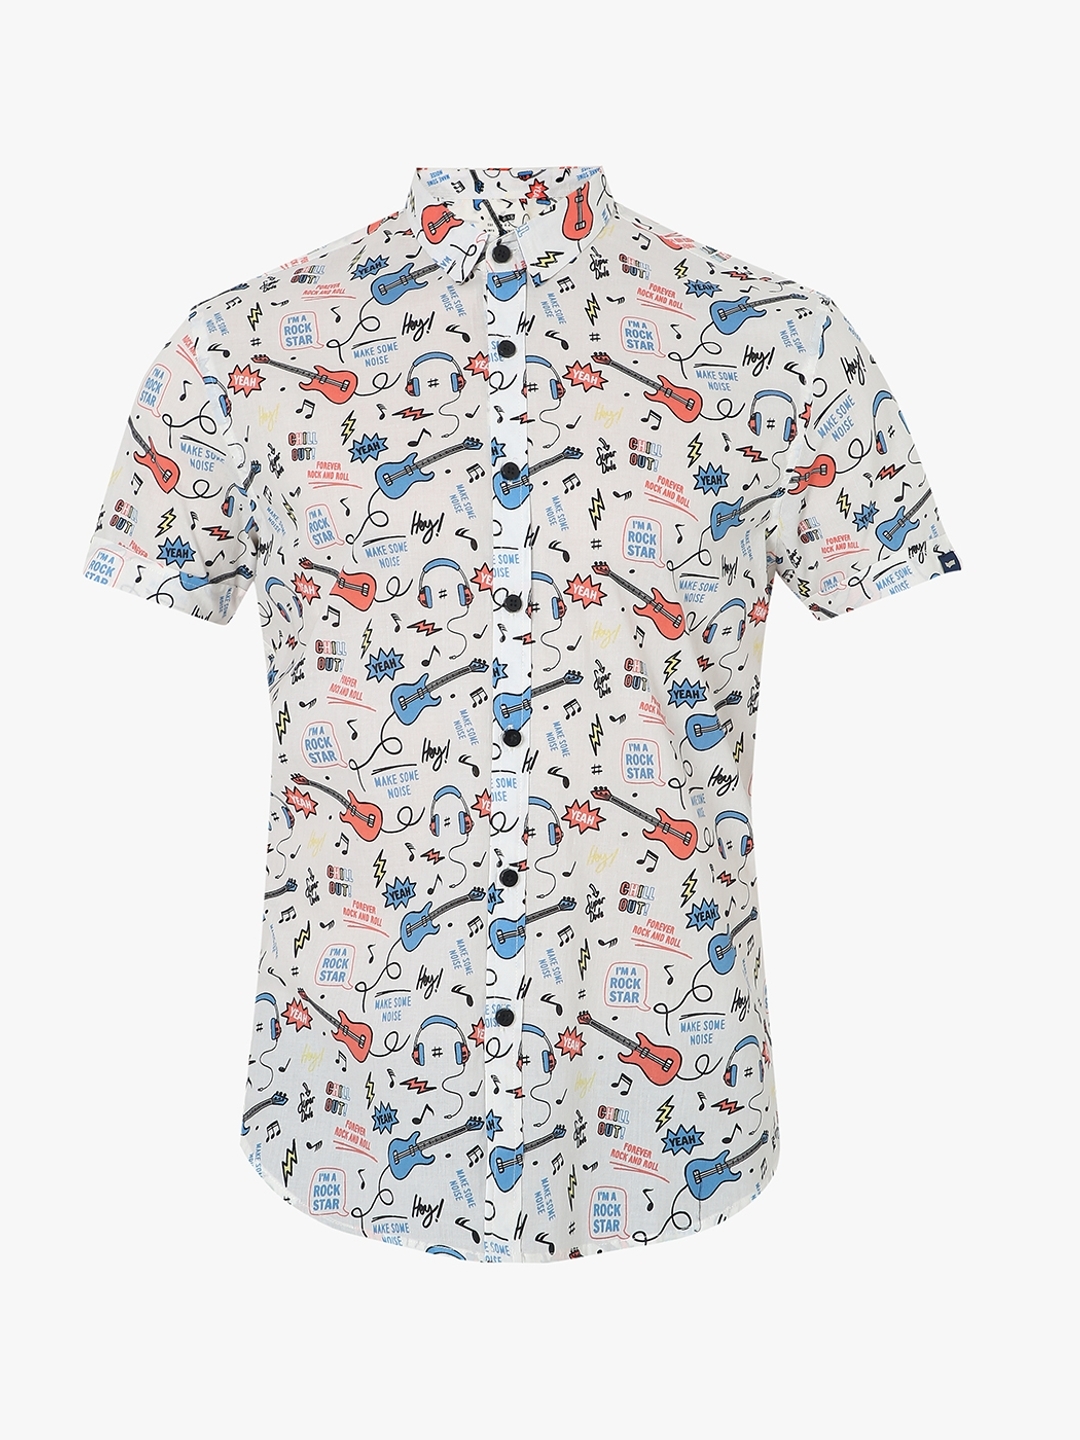 Flix Printed Slim Fit Shirt with Patch Pocket